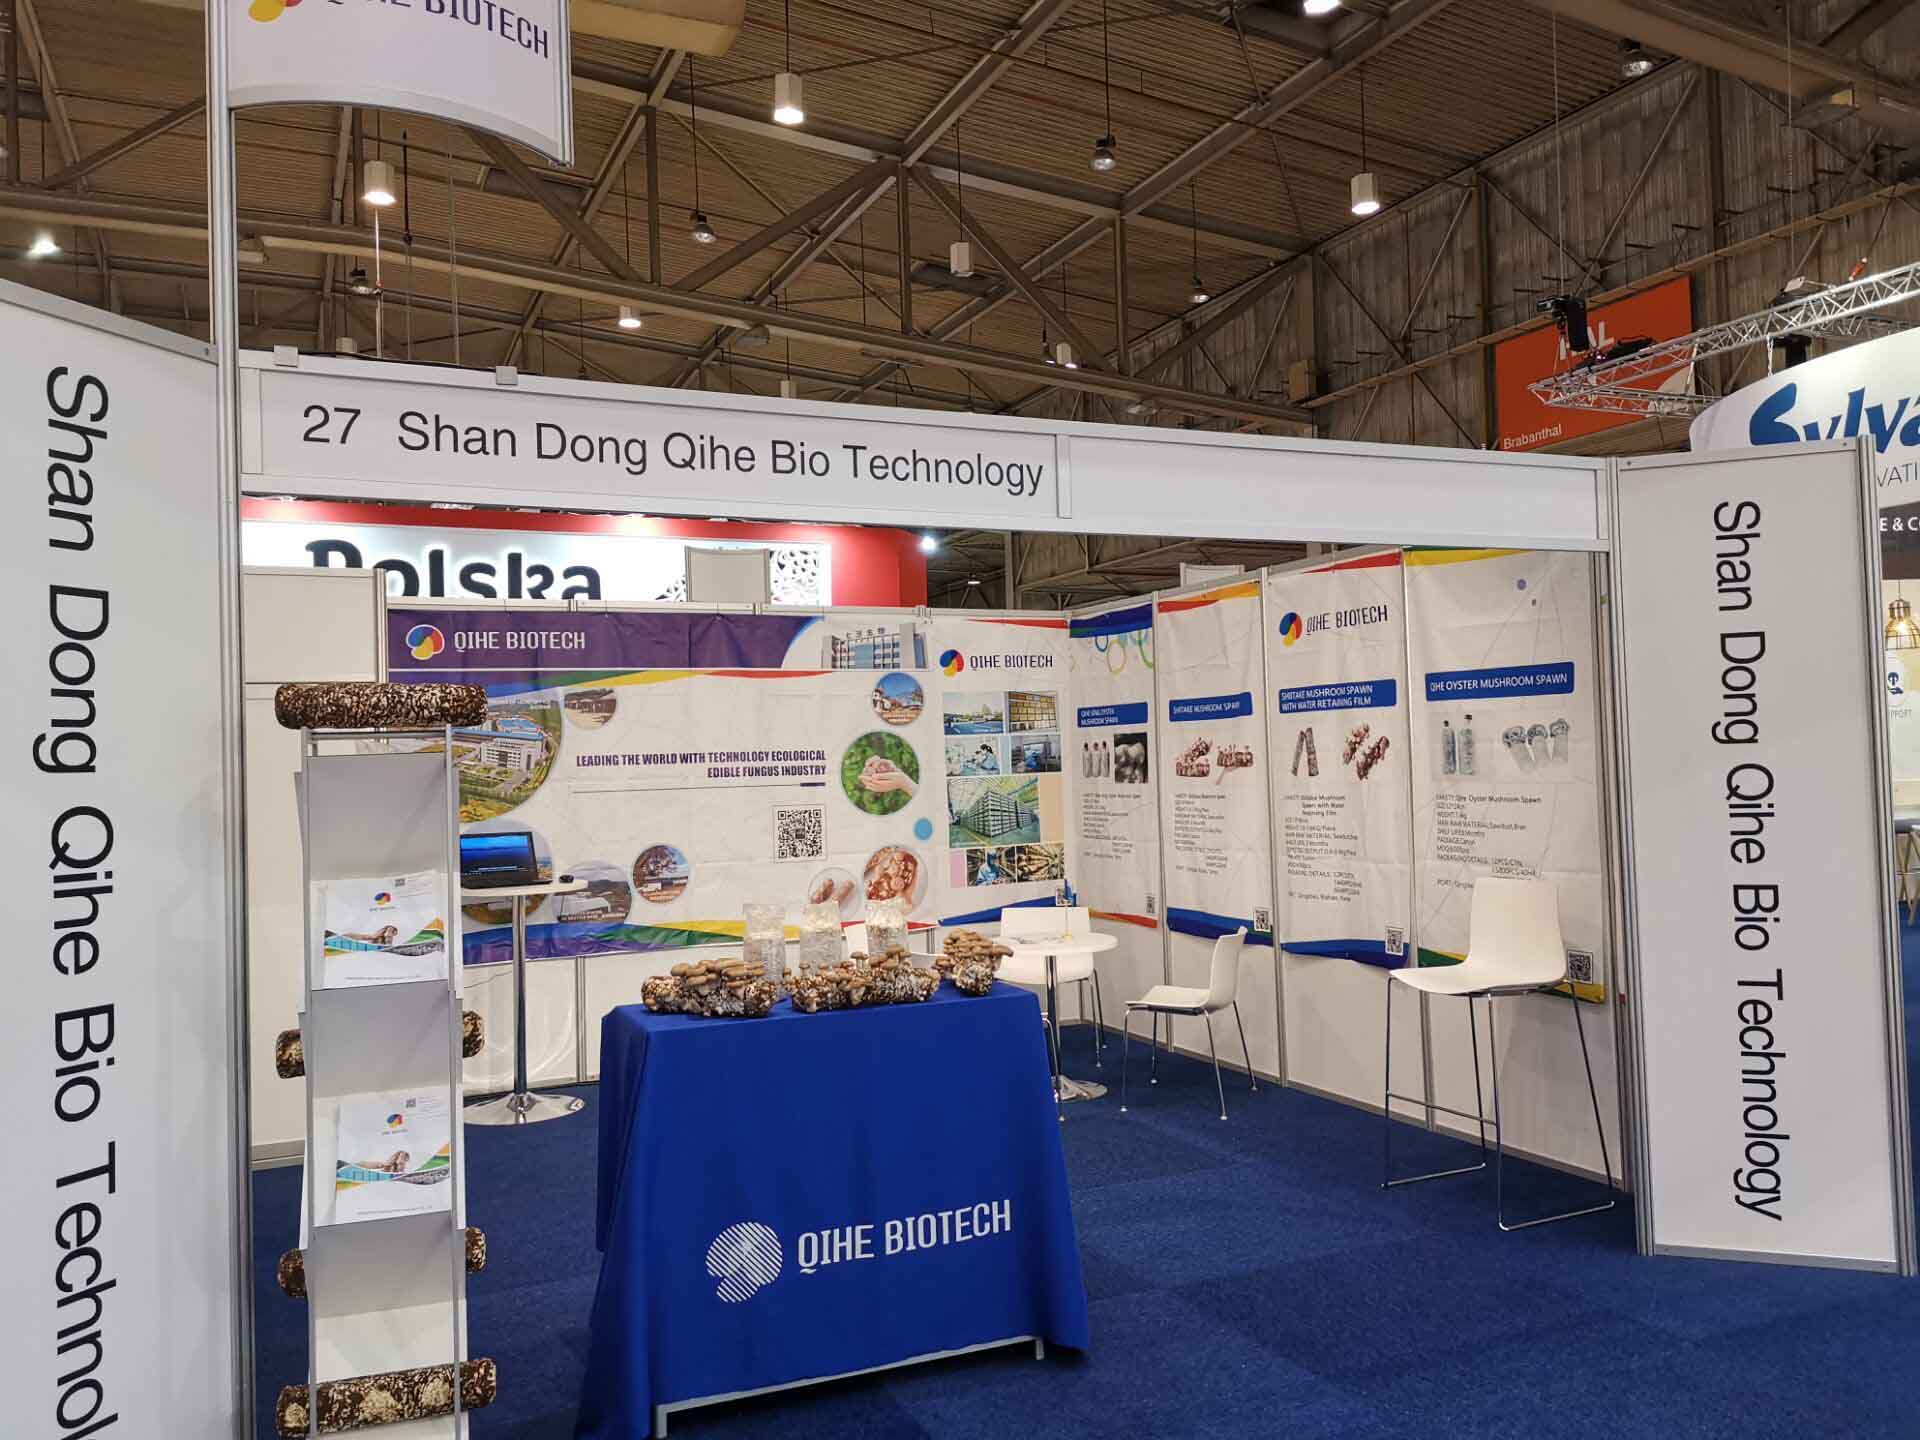 Qihe Biotech is going to attend to the expo of ‘Food & Hotel Indonesia 2019′ in Indonesia